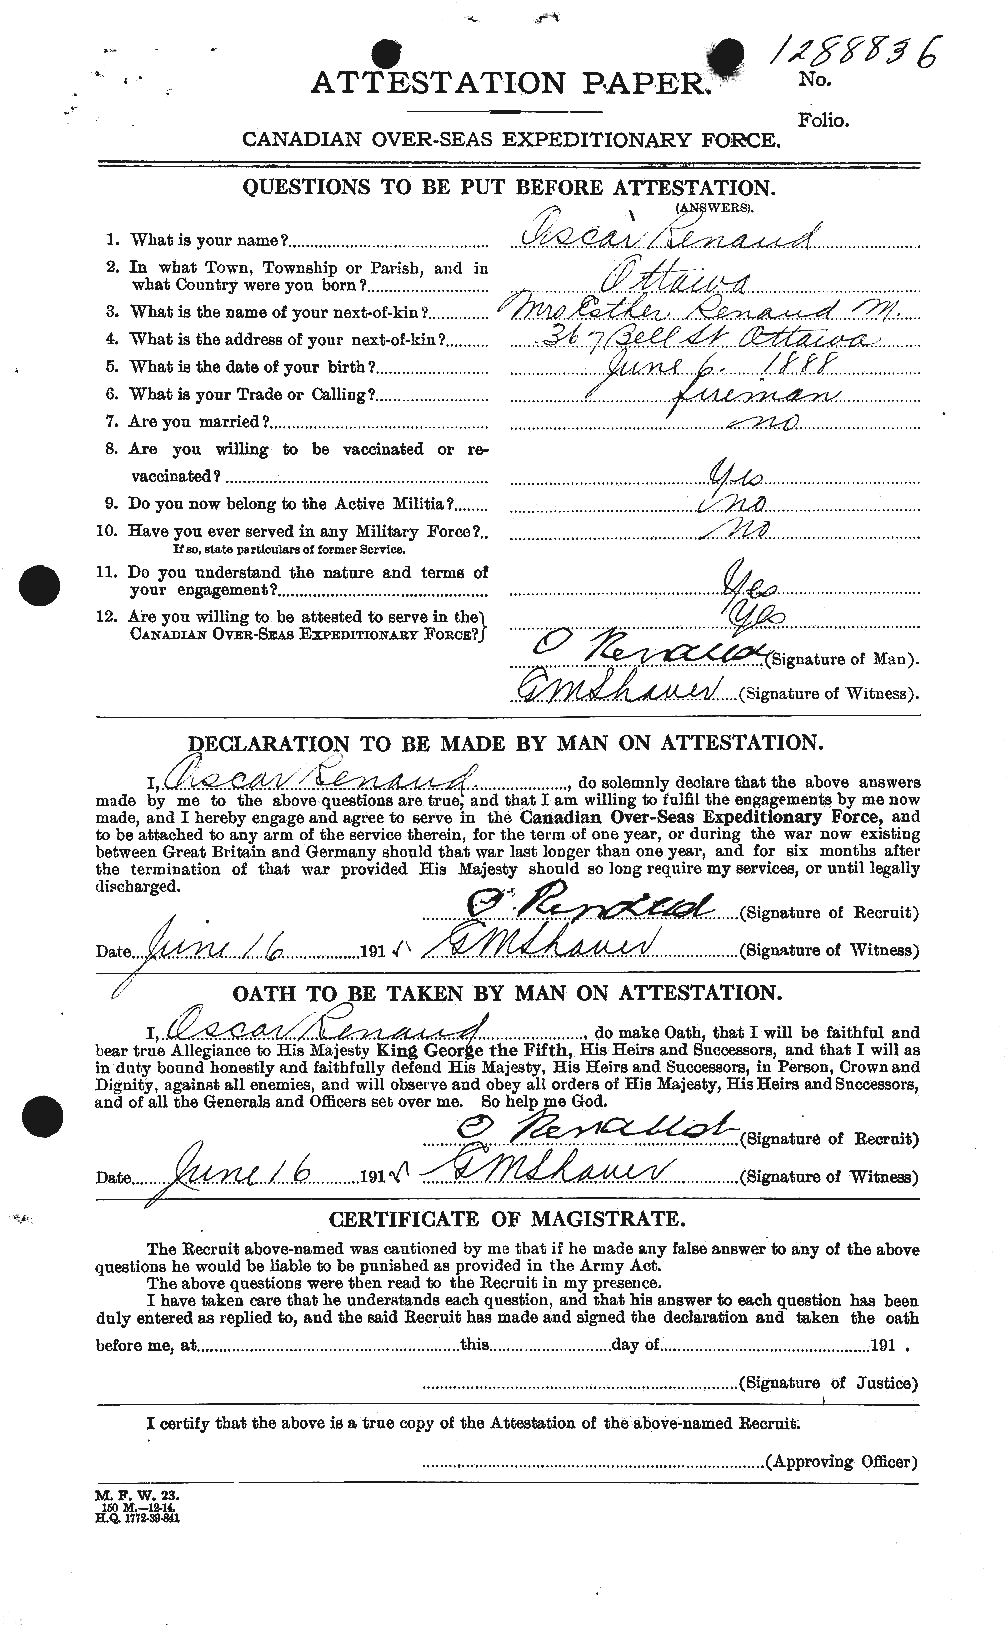 Personnel Records of the First World War - CEF 599712a